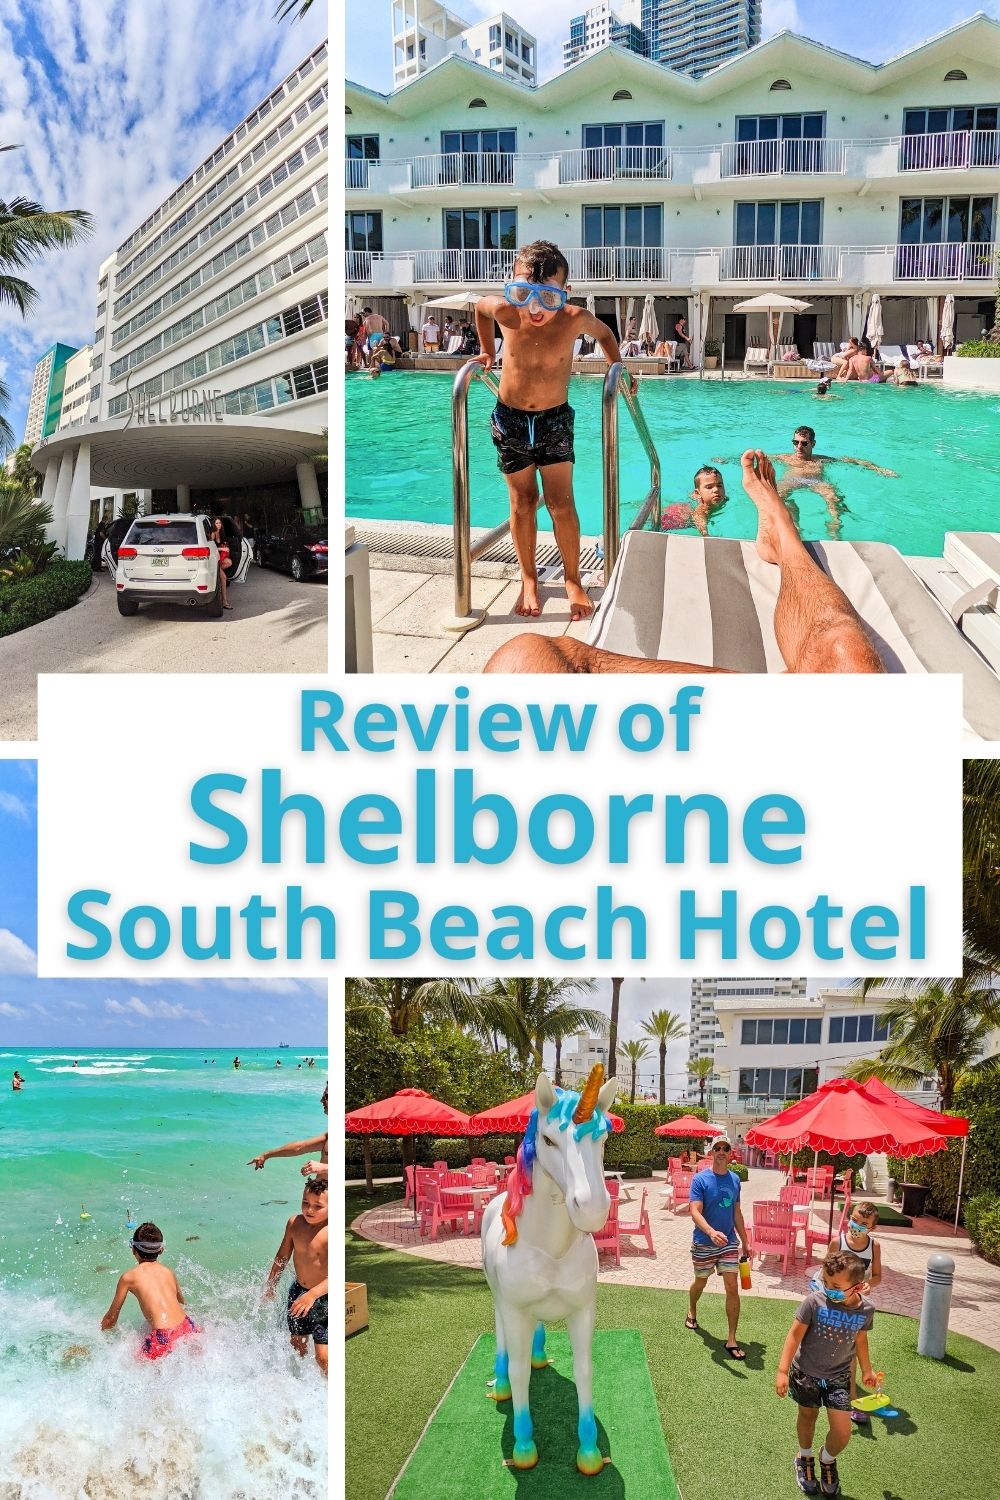 Review of the Shelborn South Beach hotel in Miami, including things to do and dining recommendations in the Art Deco District of Miami Beach. Tips for planning a fun weekend getaway to the Shelborne on the beach.